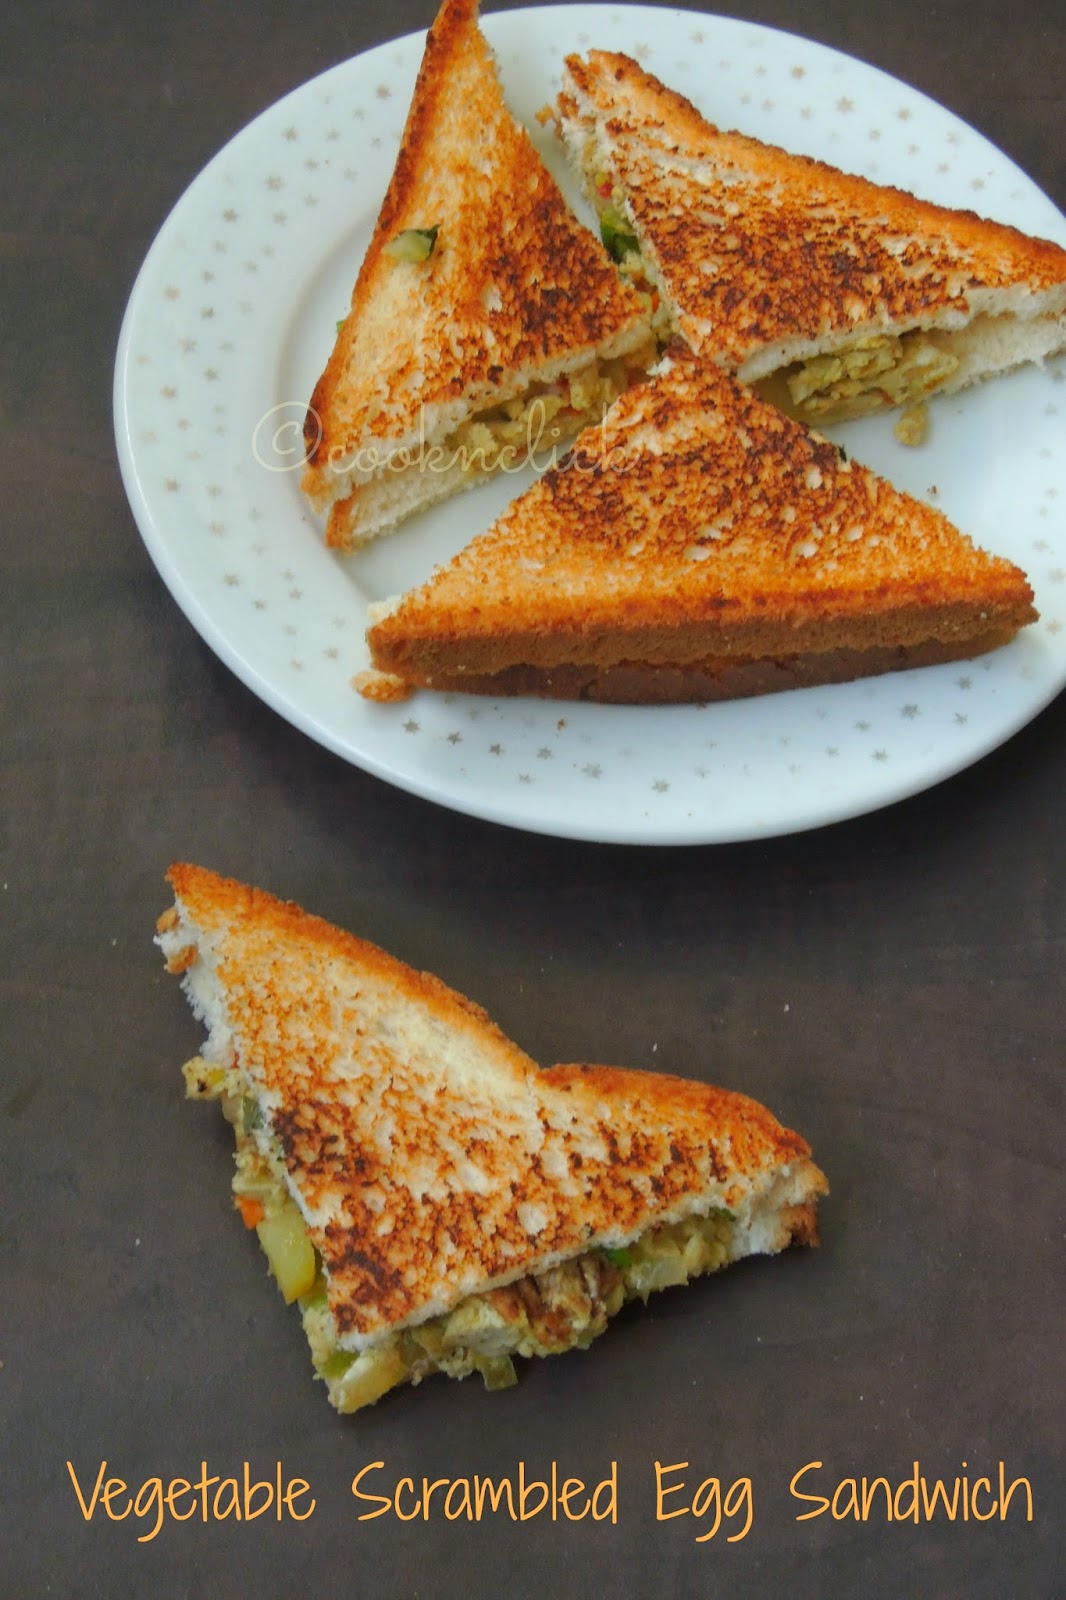 Scrambled Egg sandwich with vegetable, vegetable scrambled egg sandwich